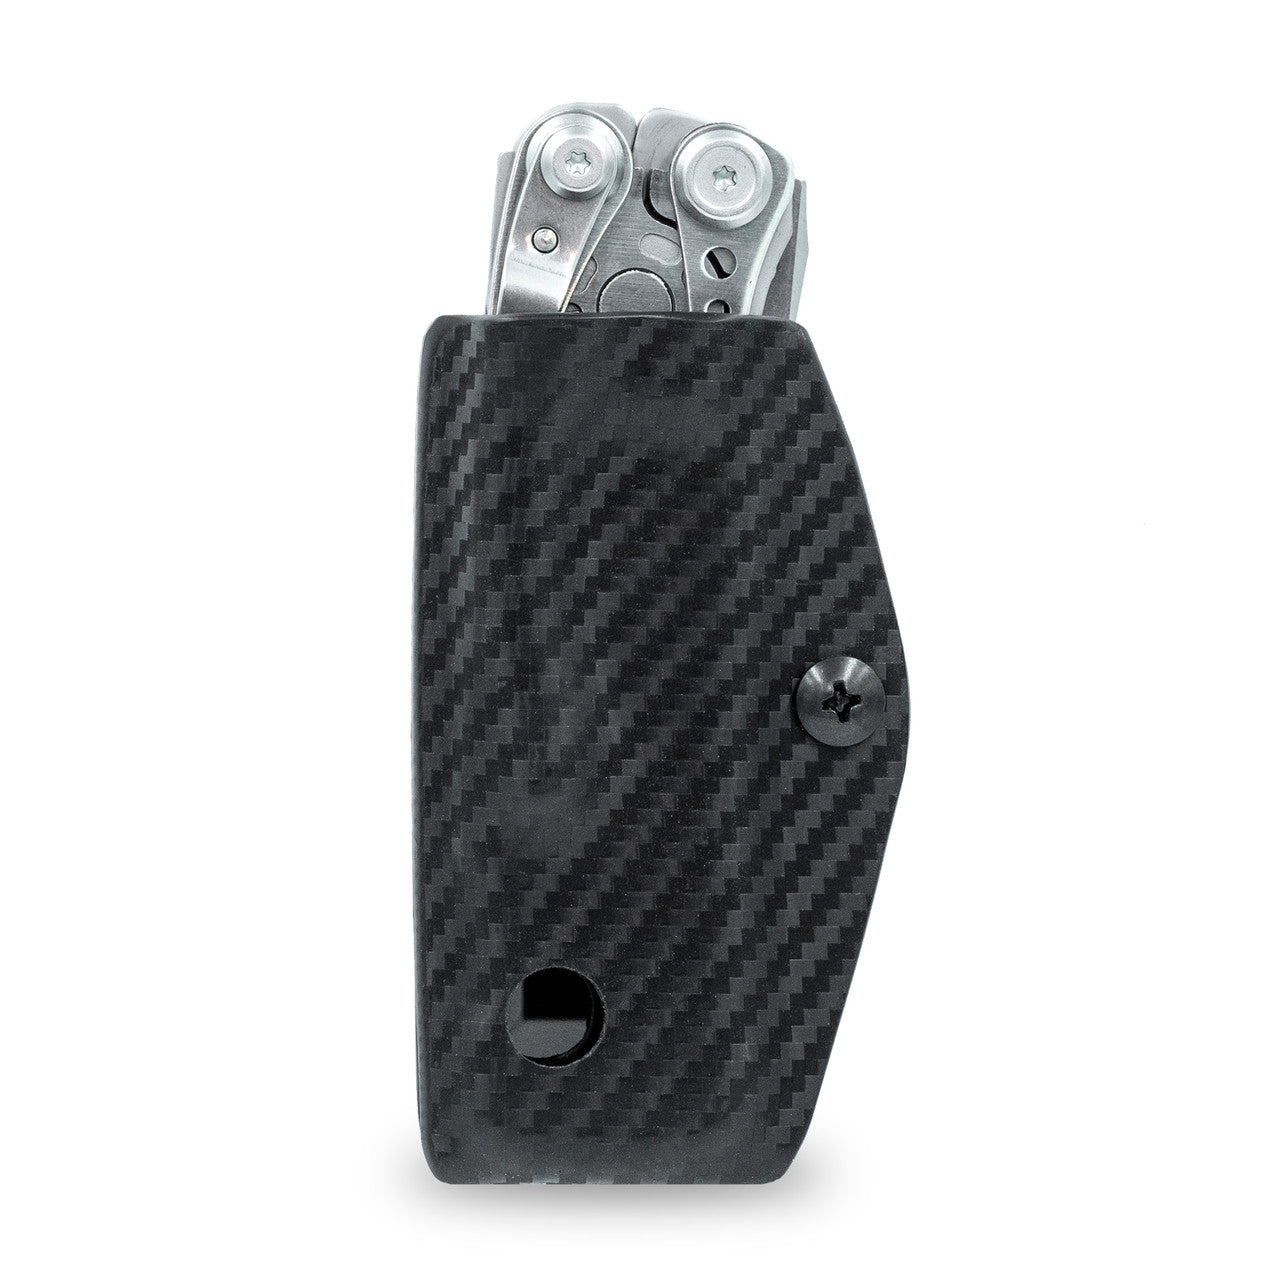 Kydex Sheath for the Leatherman Skeletool Clip & Carry